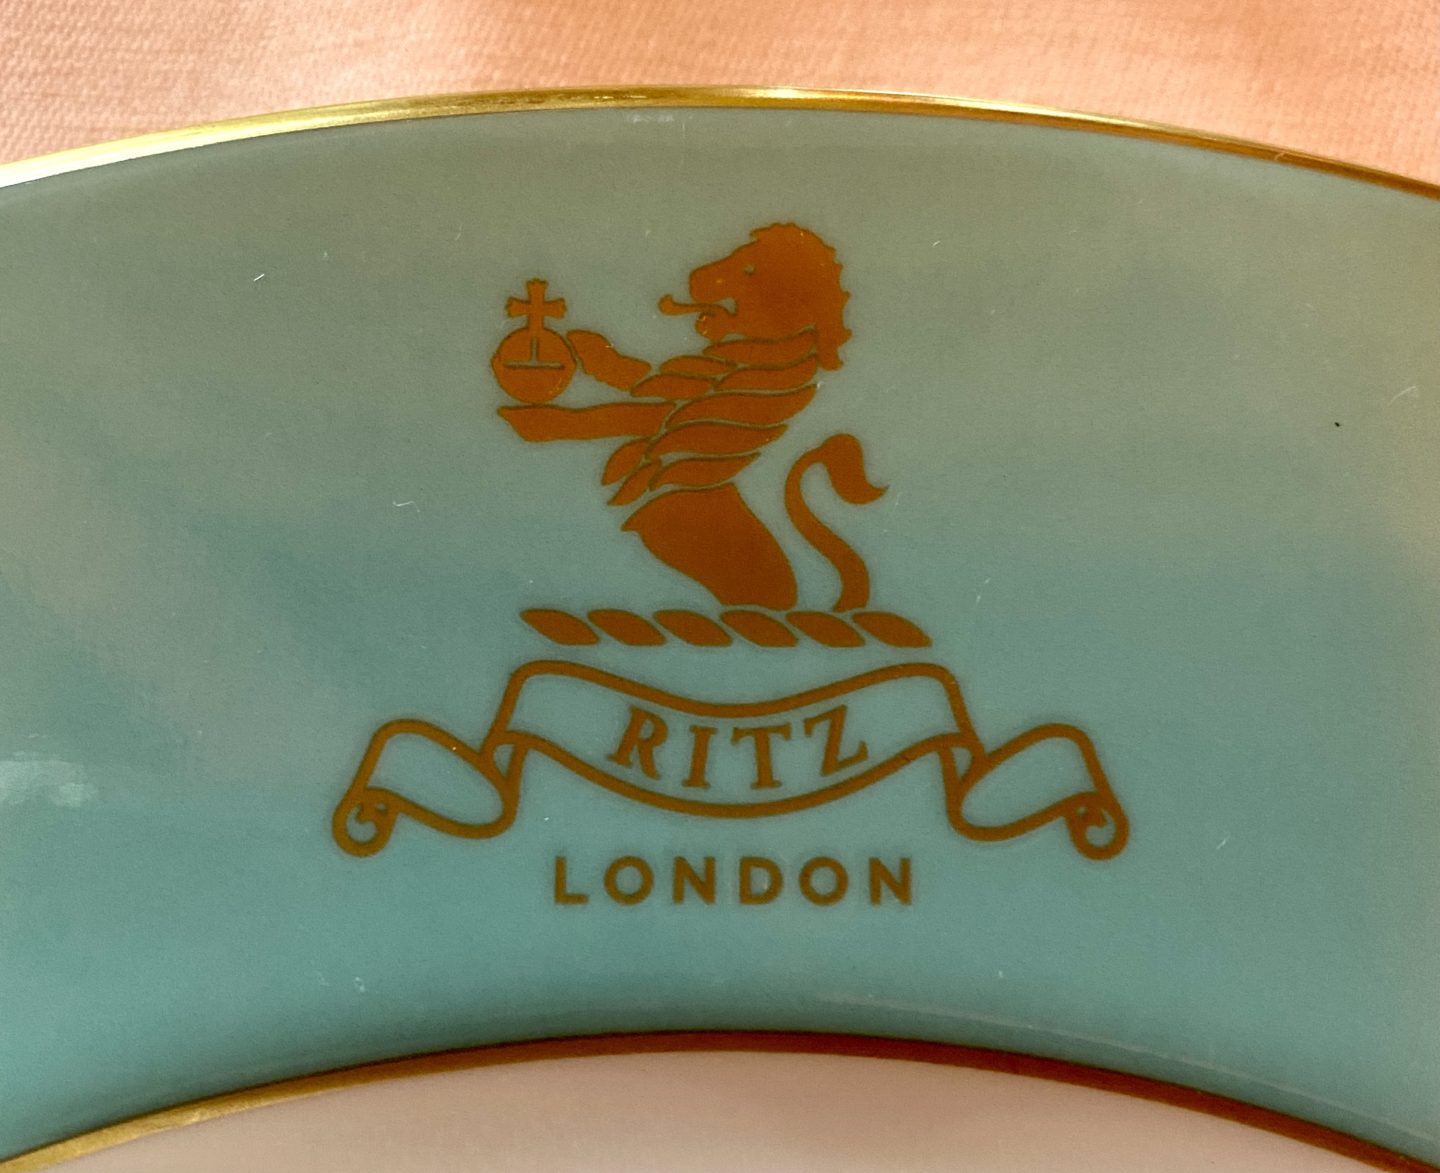 The ritz hotel plate 